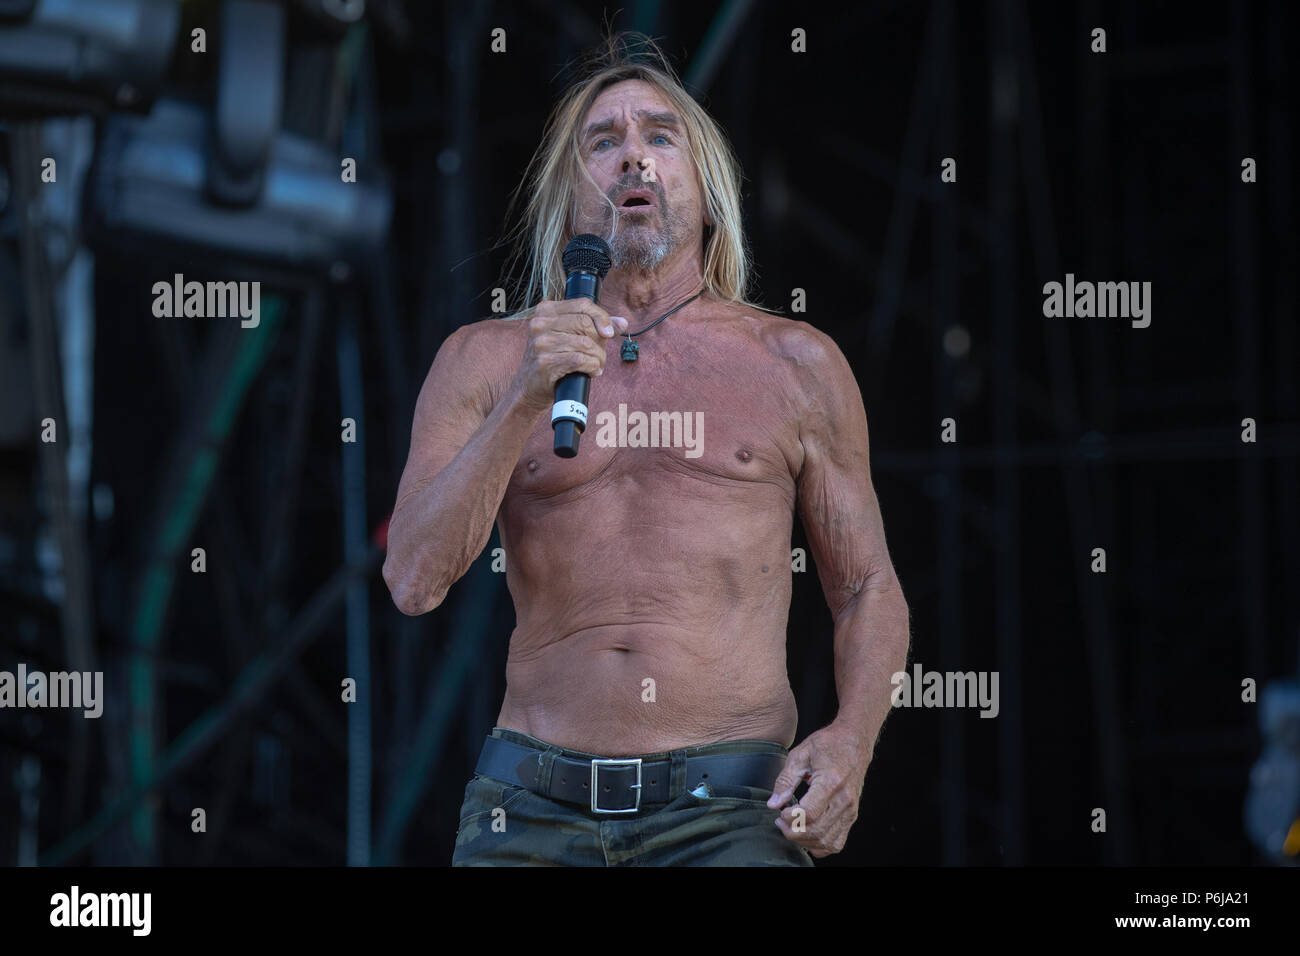 Finsbury park, UK. 30th June, 2018, singer, songwriter Iggy Pop performing at Queens of the Stone Age and Friends. UK.Finsbury park London.© Jason Richardson / Alamy Live News Stock Photo - Alamy